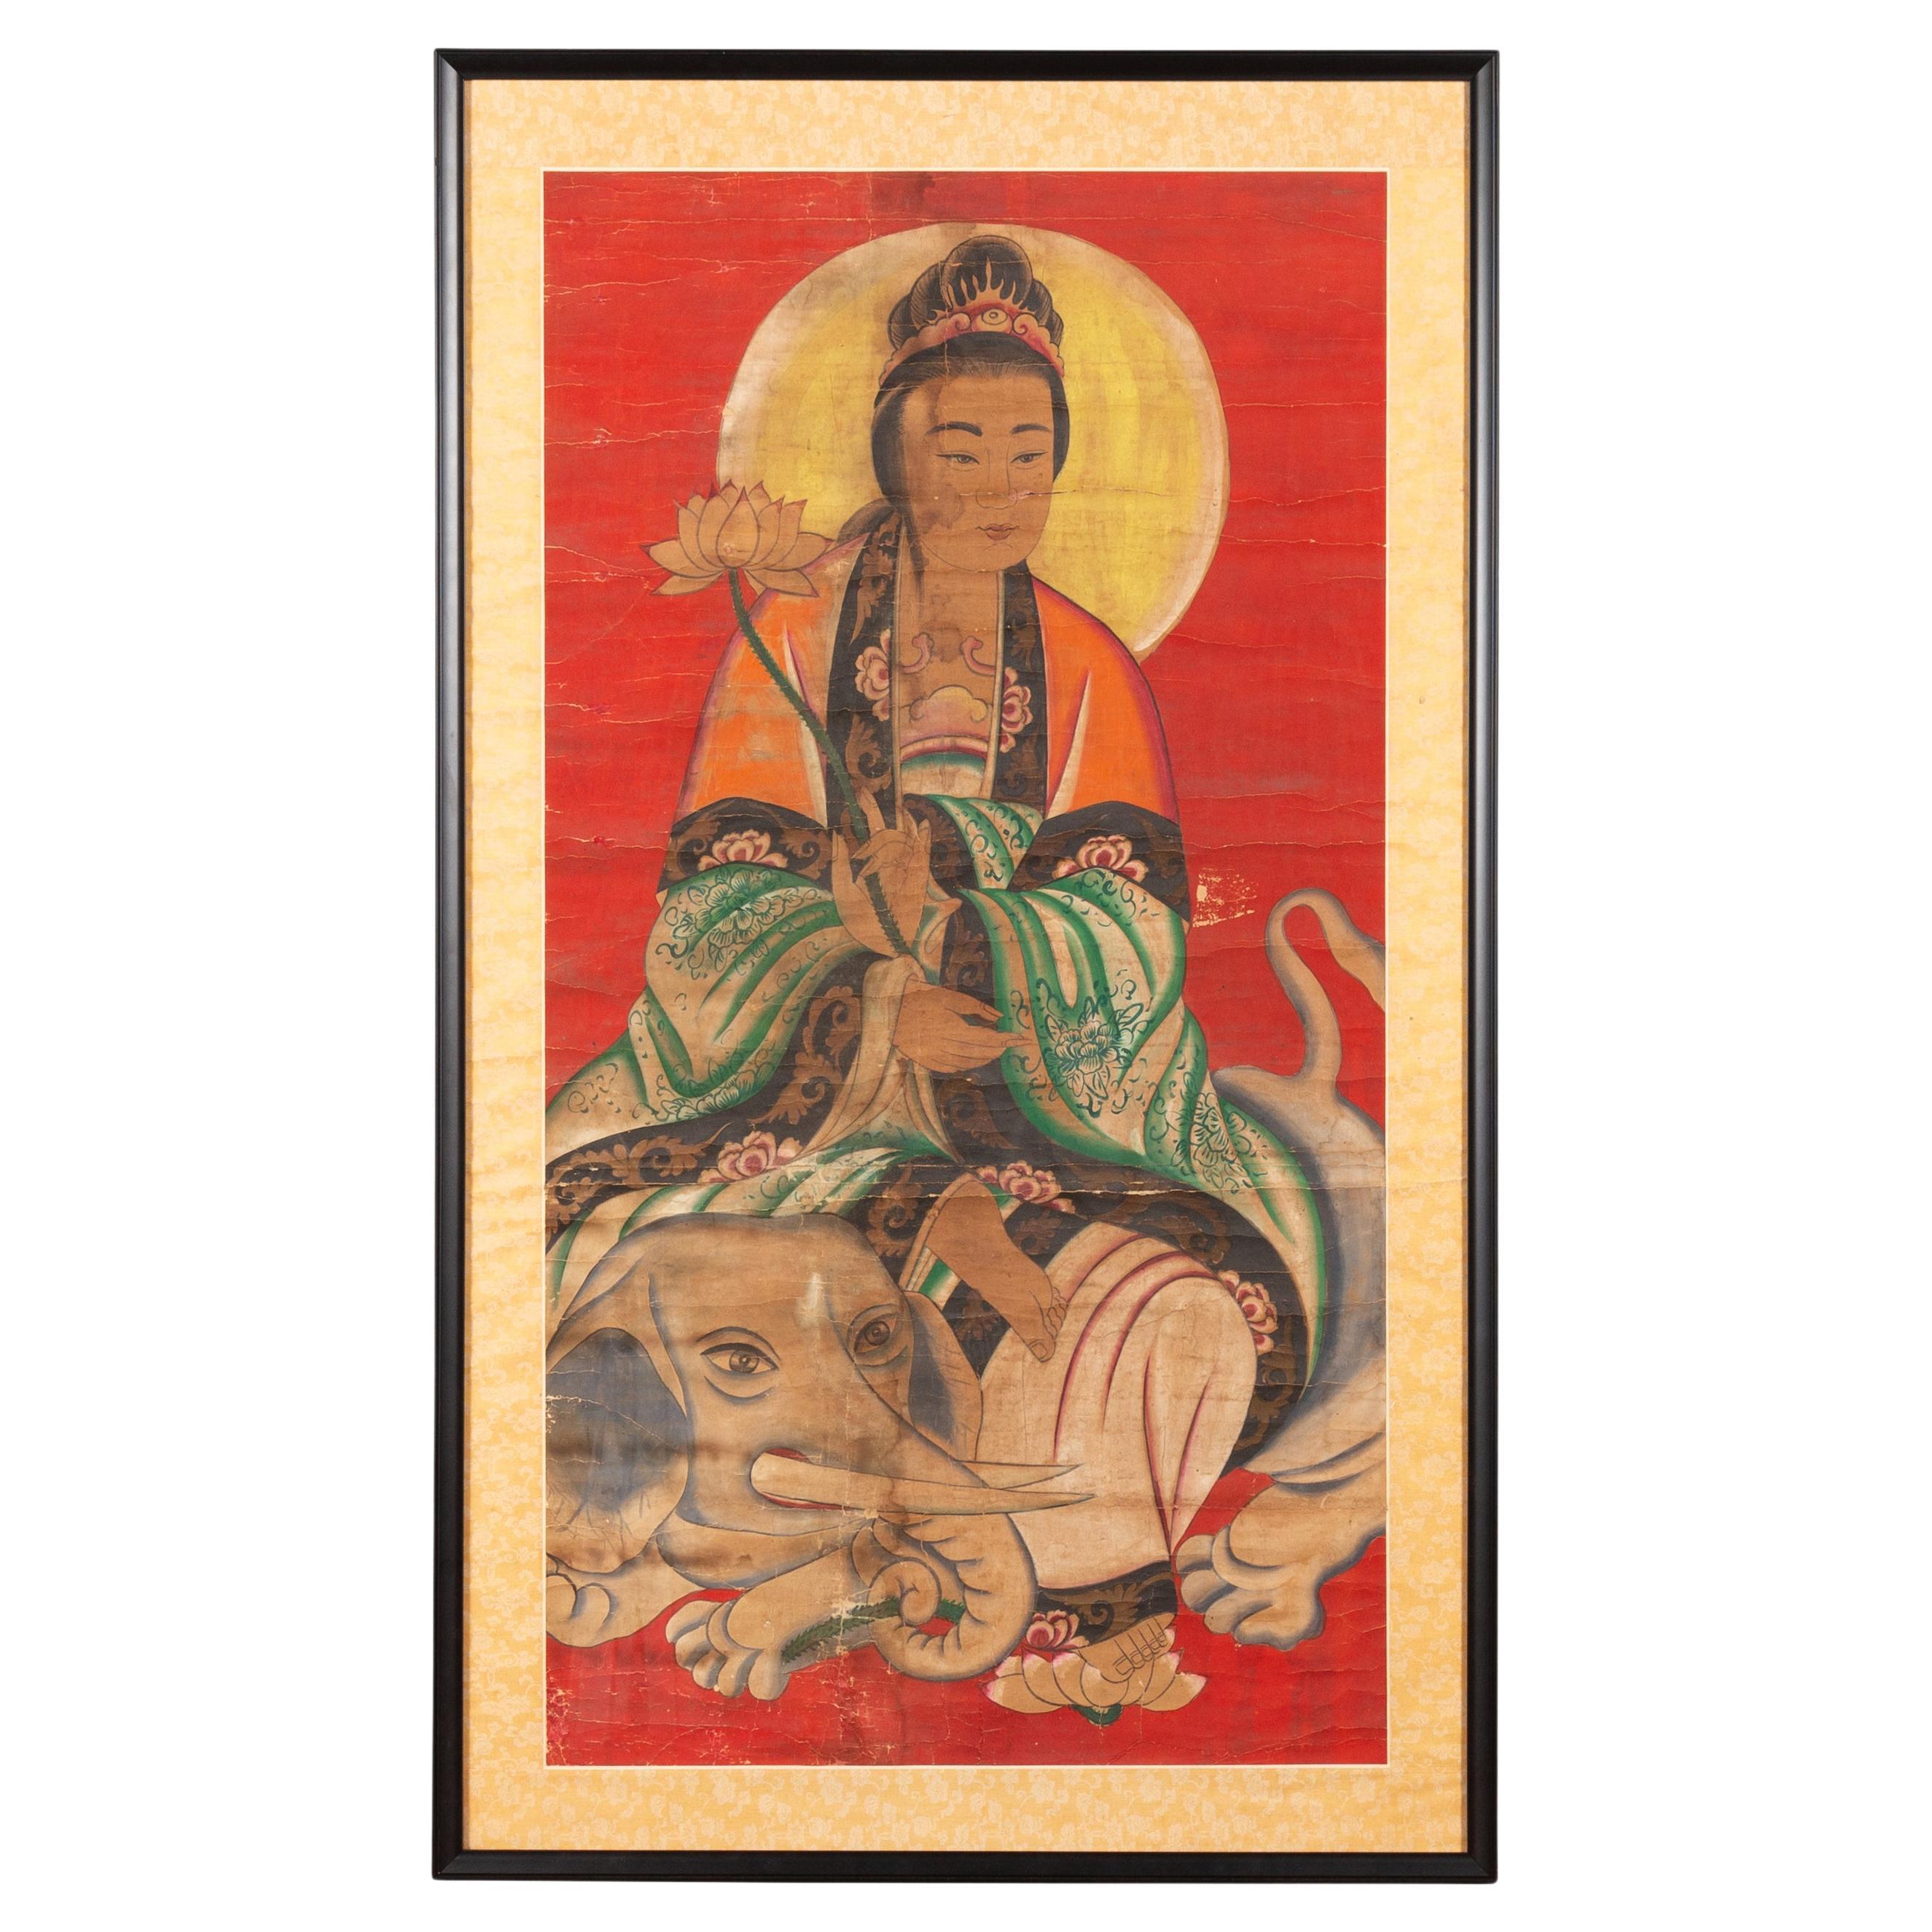 19th Century Indian Print with Guanyin the Bodhisattva of Compassion on Elephant